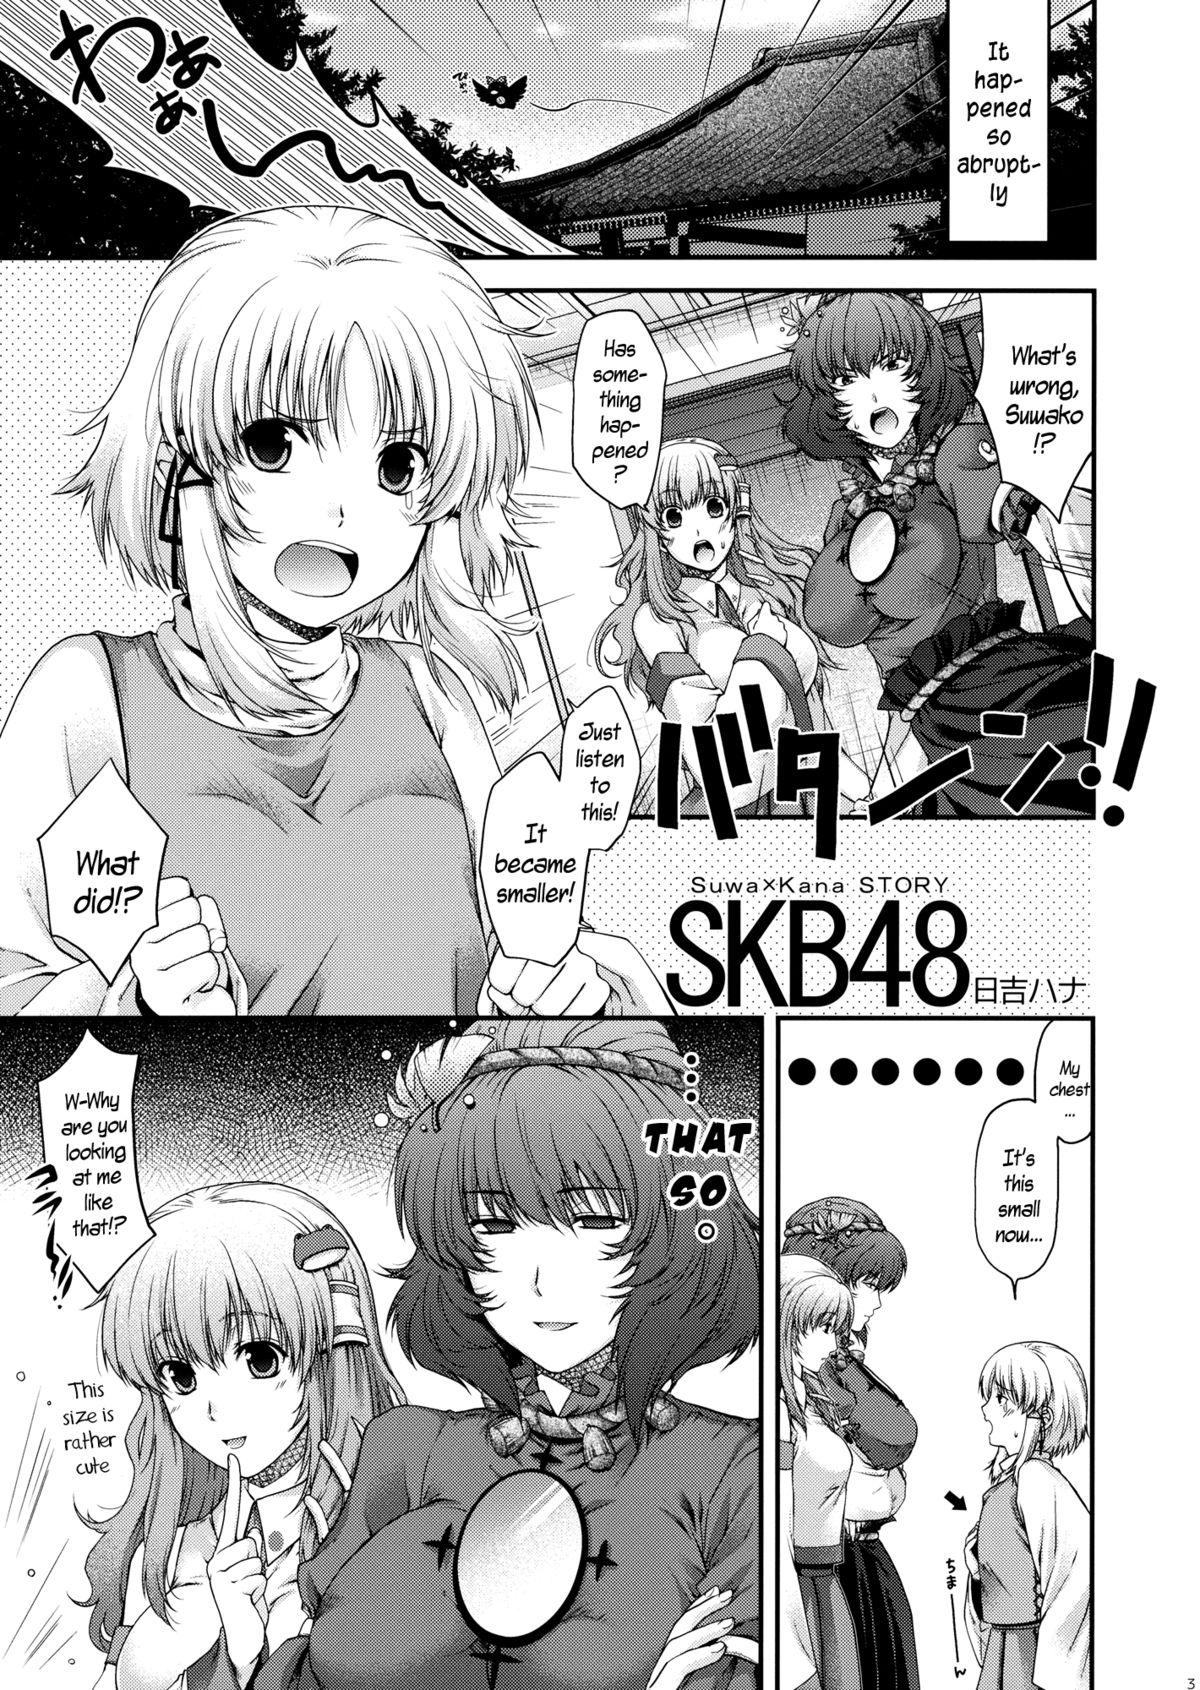 Class Room SKB48 - Touhou project Punishment - Page 3